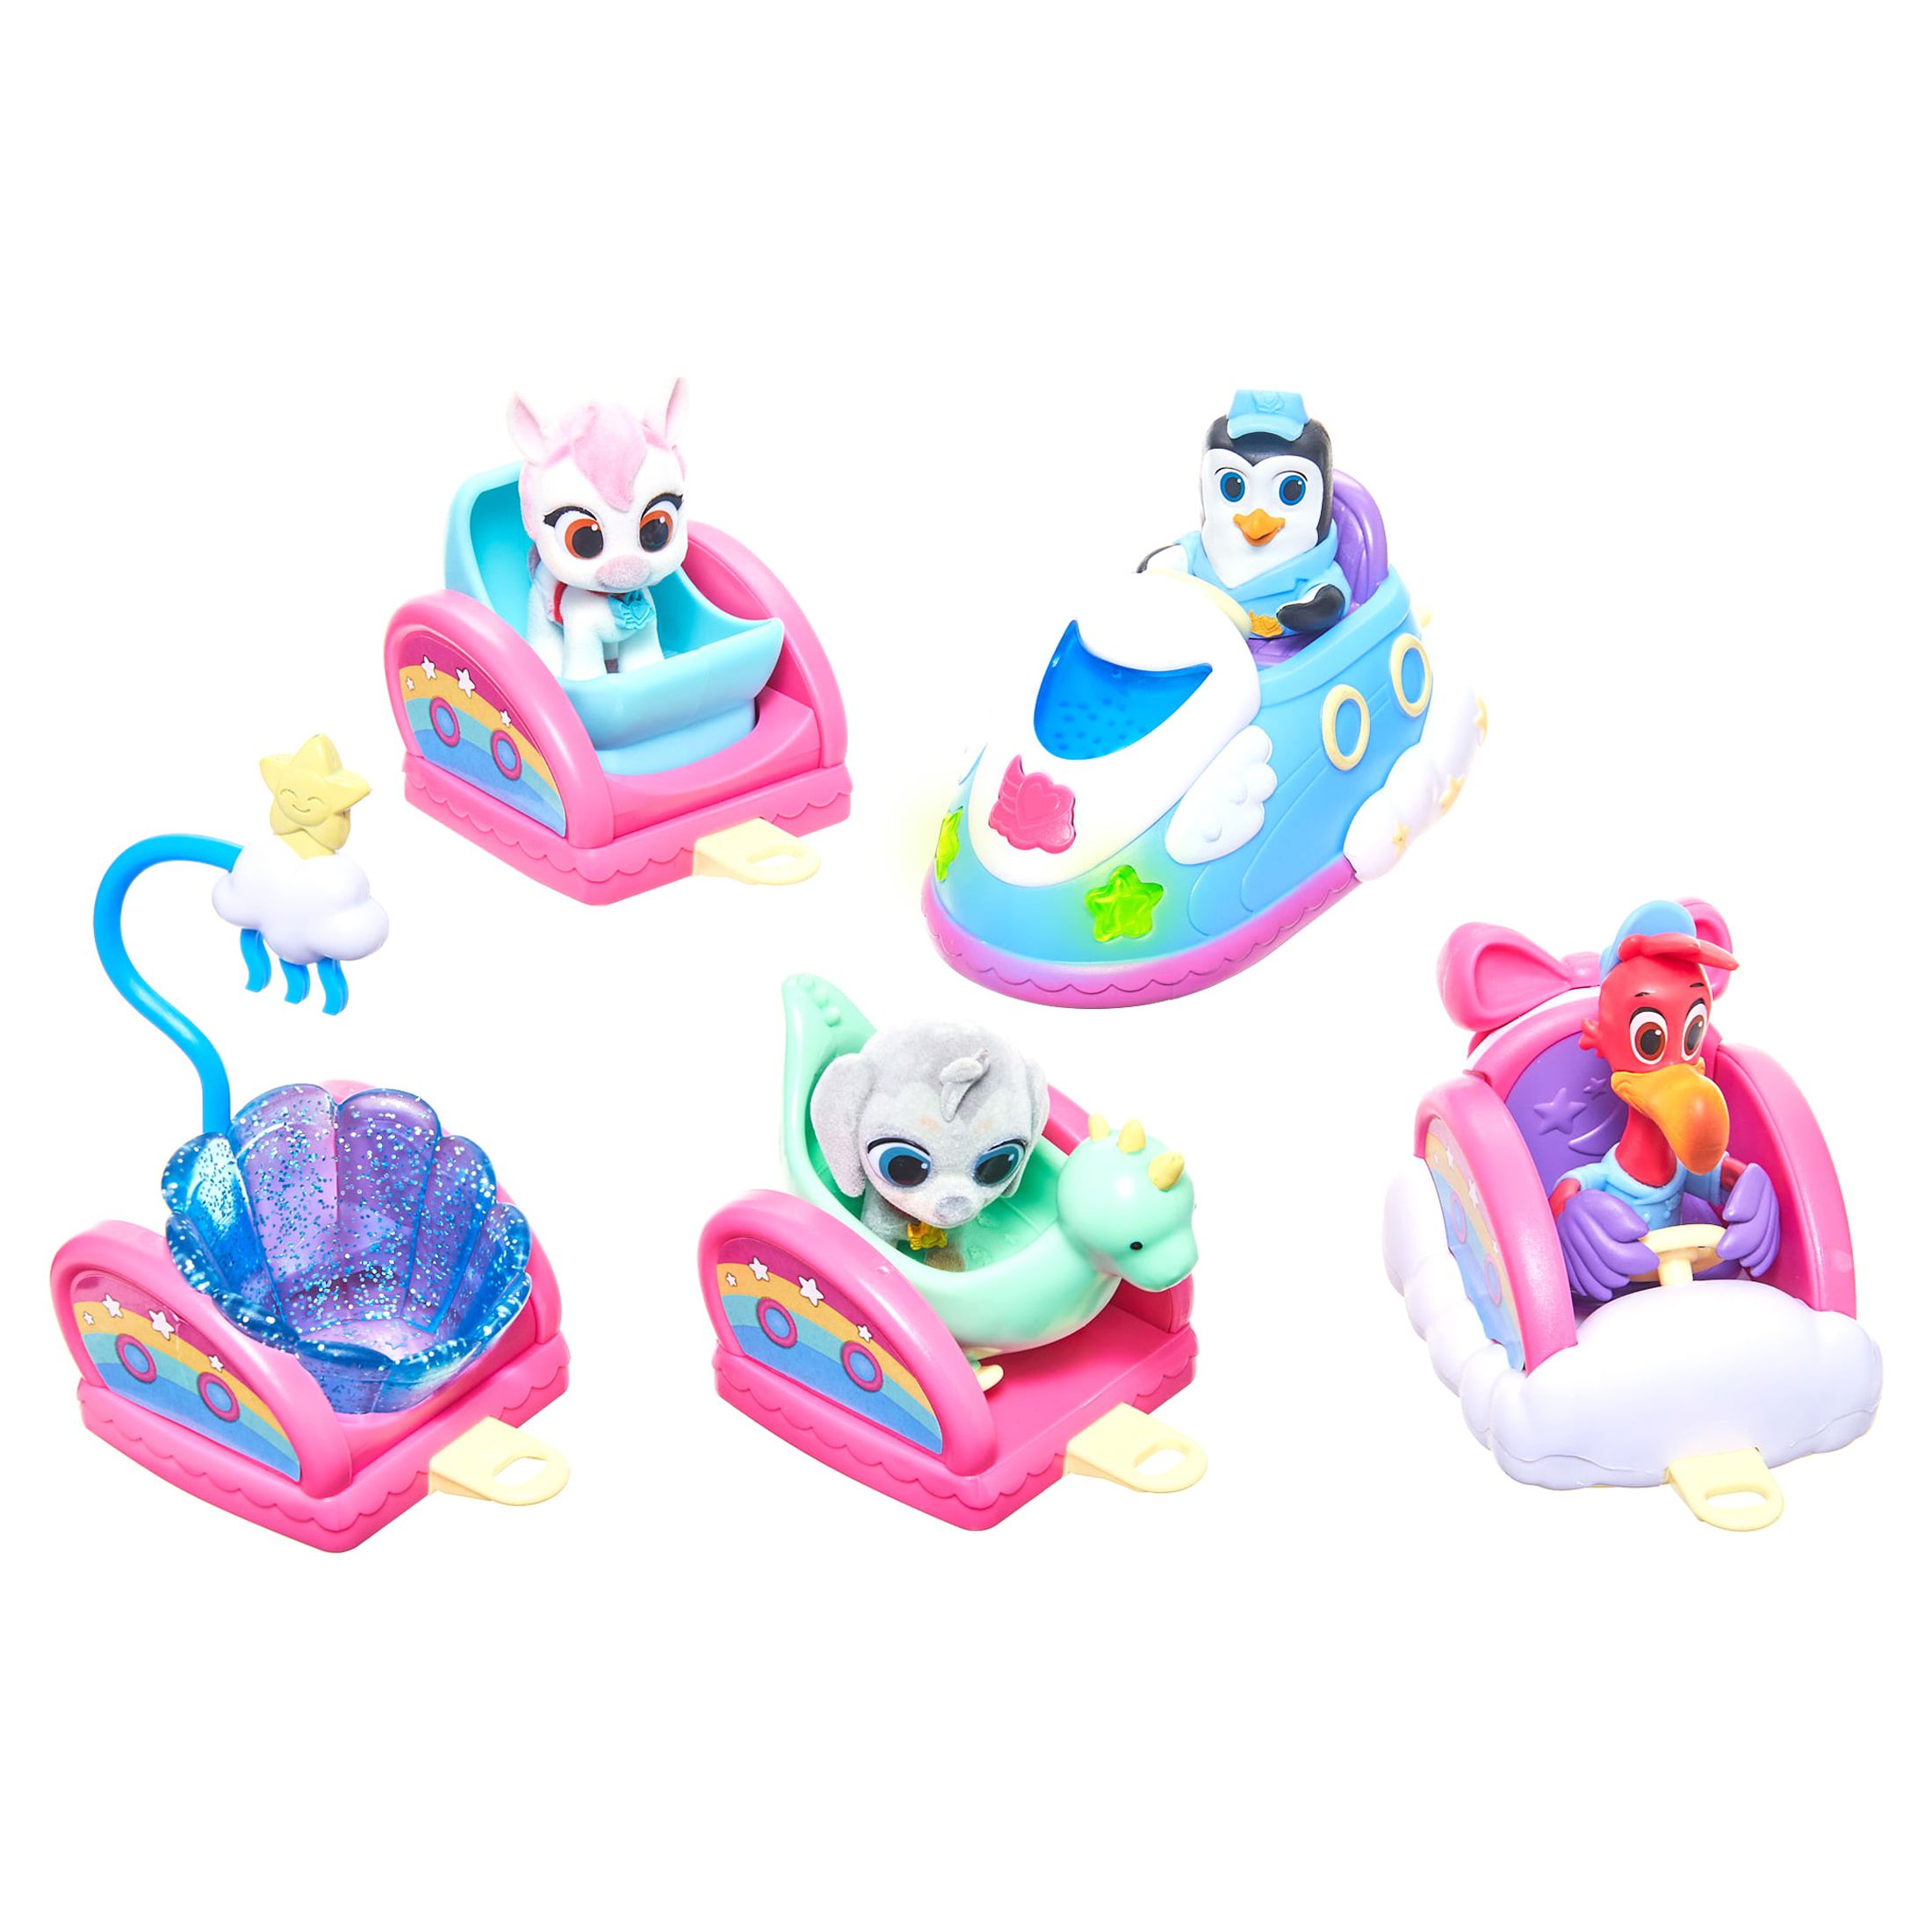 Disney Junior T.O.T.S. Chugga Chugga Choo-Choo Playset, 8 pieces, Officially Licensed Kids Toys for Ages 3 Up, Gifts and Presents - image 4 of 7